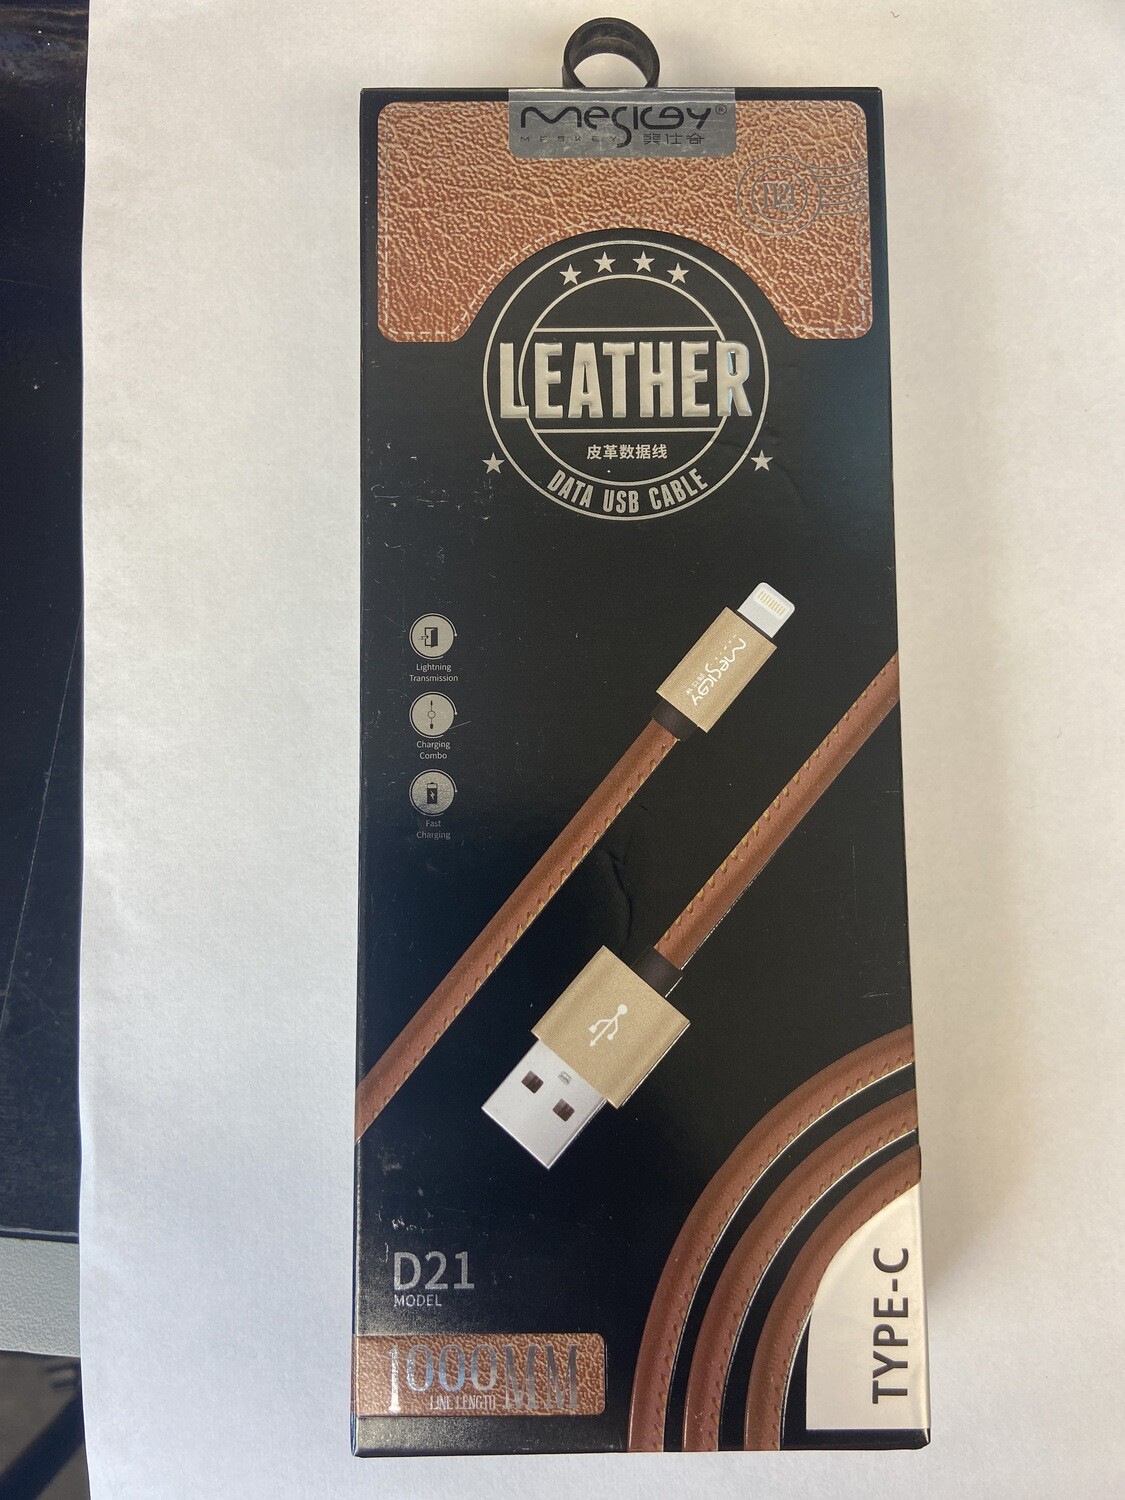 Leather Type-C charger